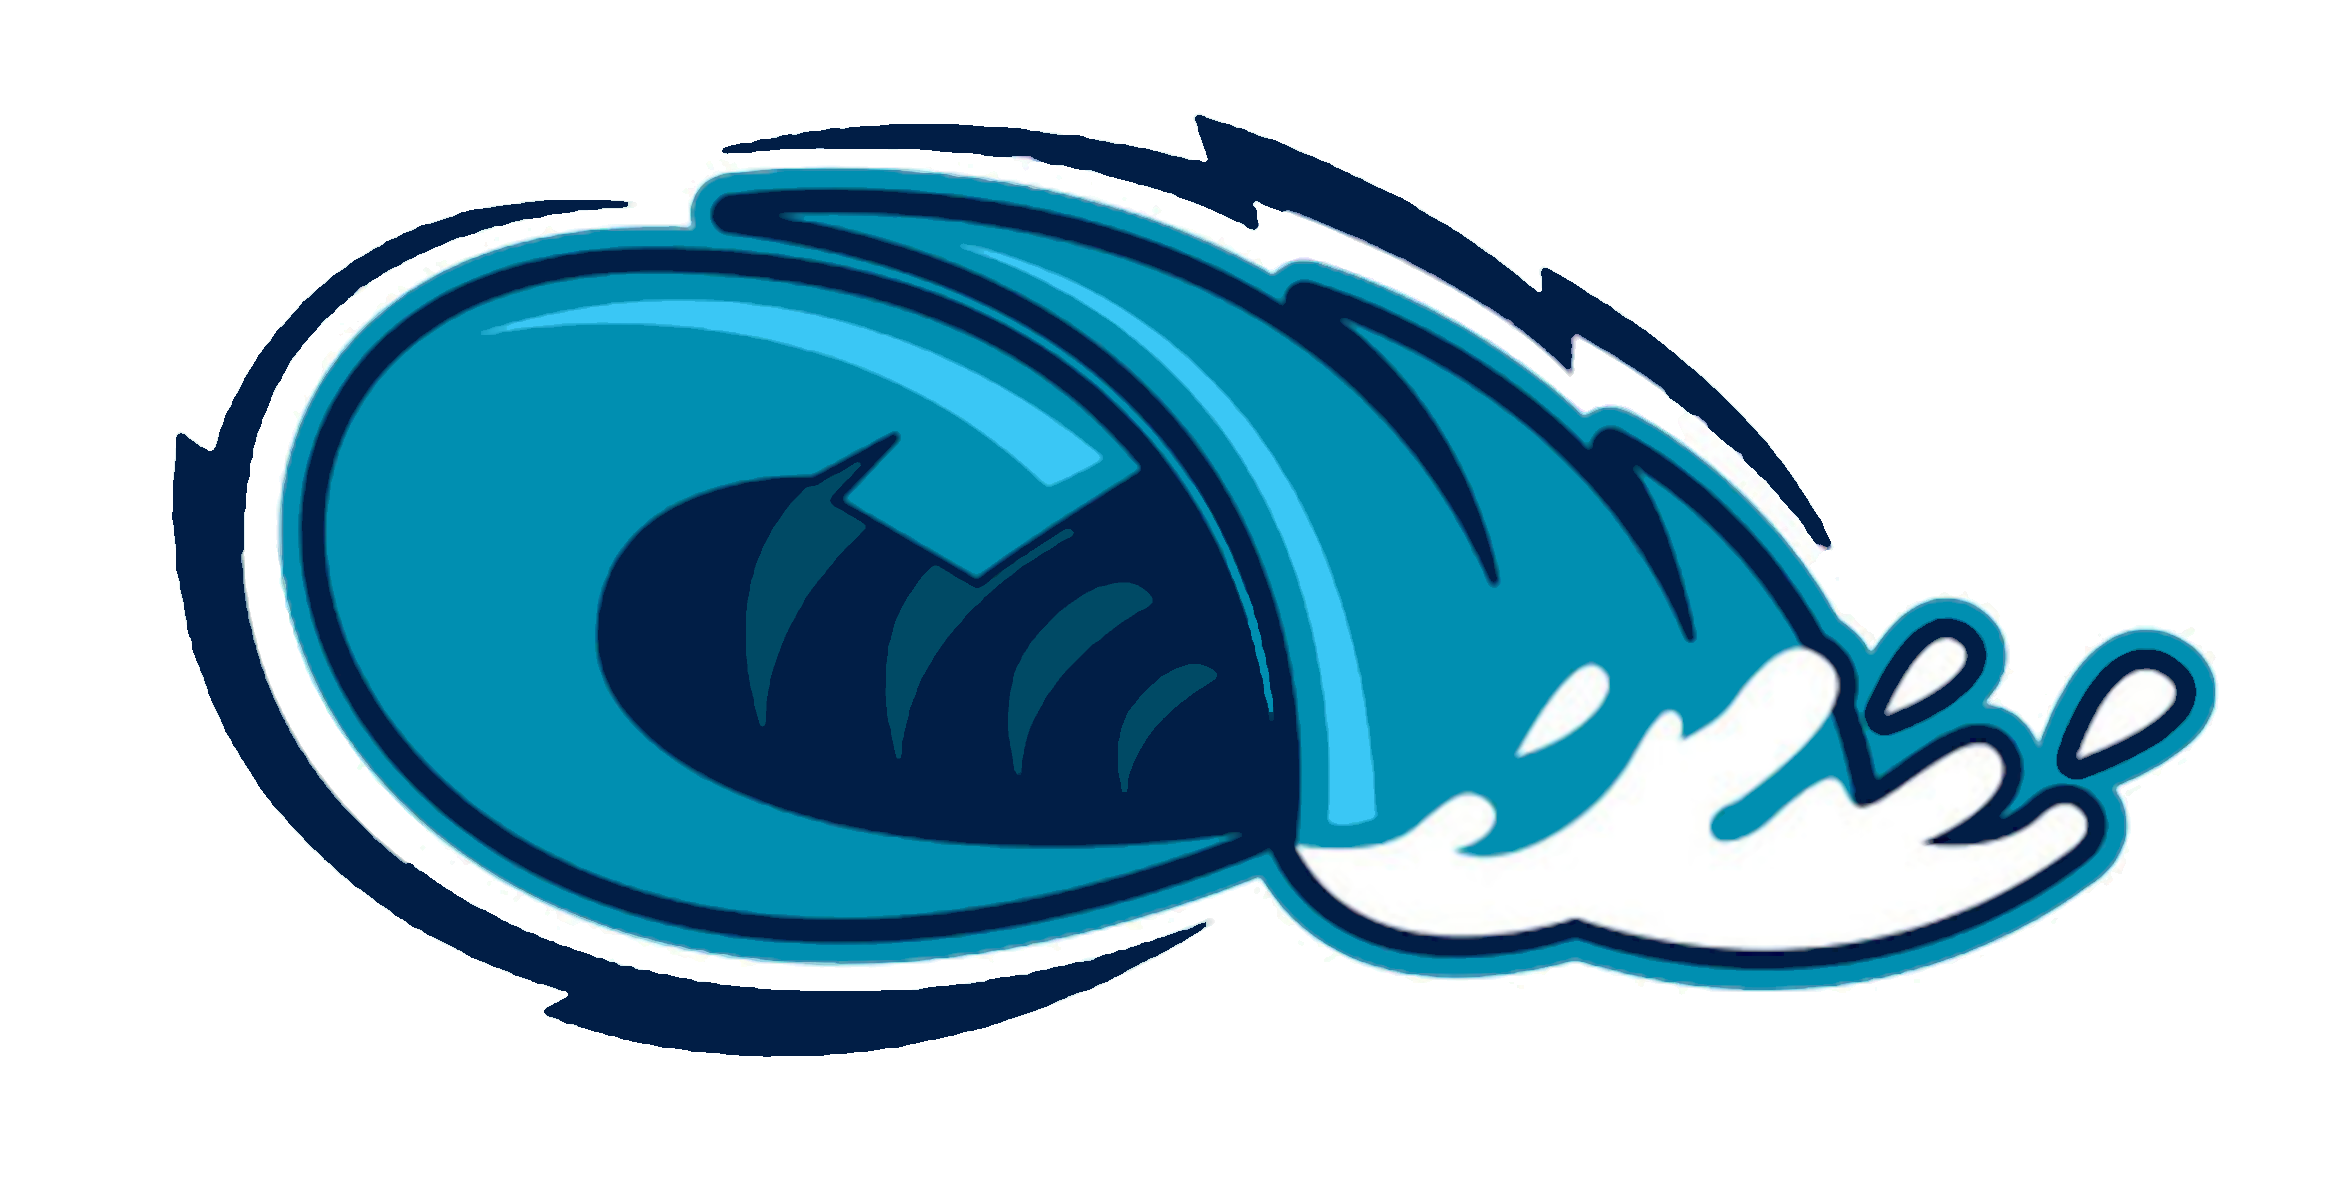 Waves wave clipart 3